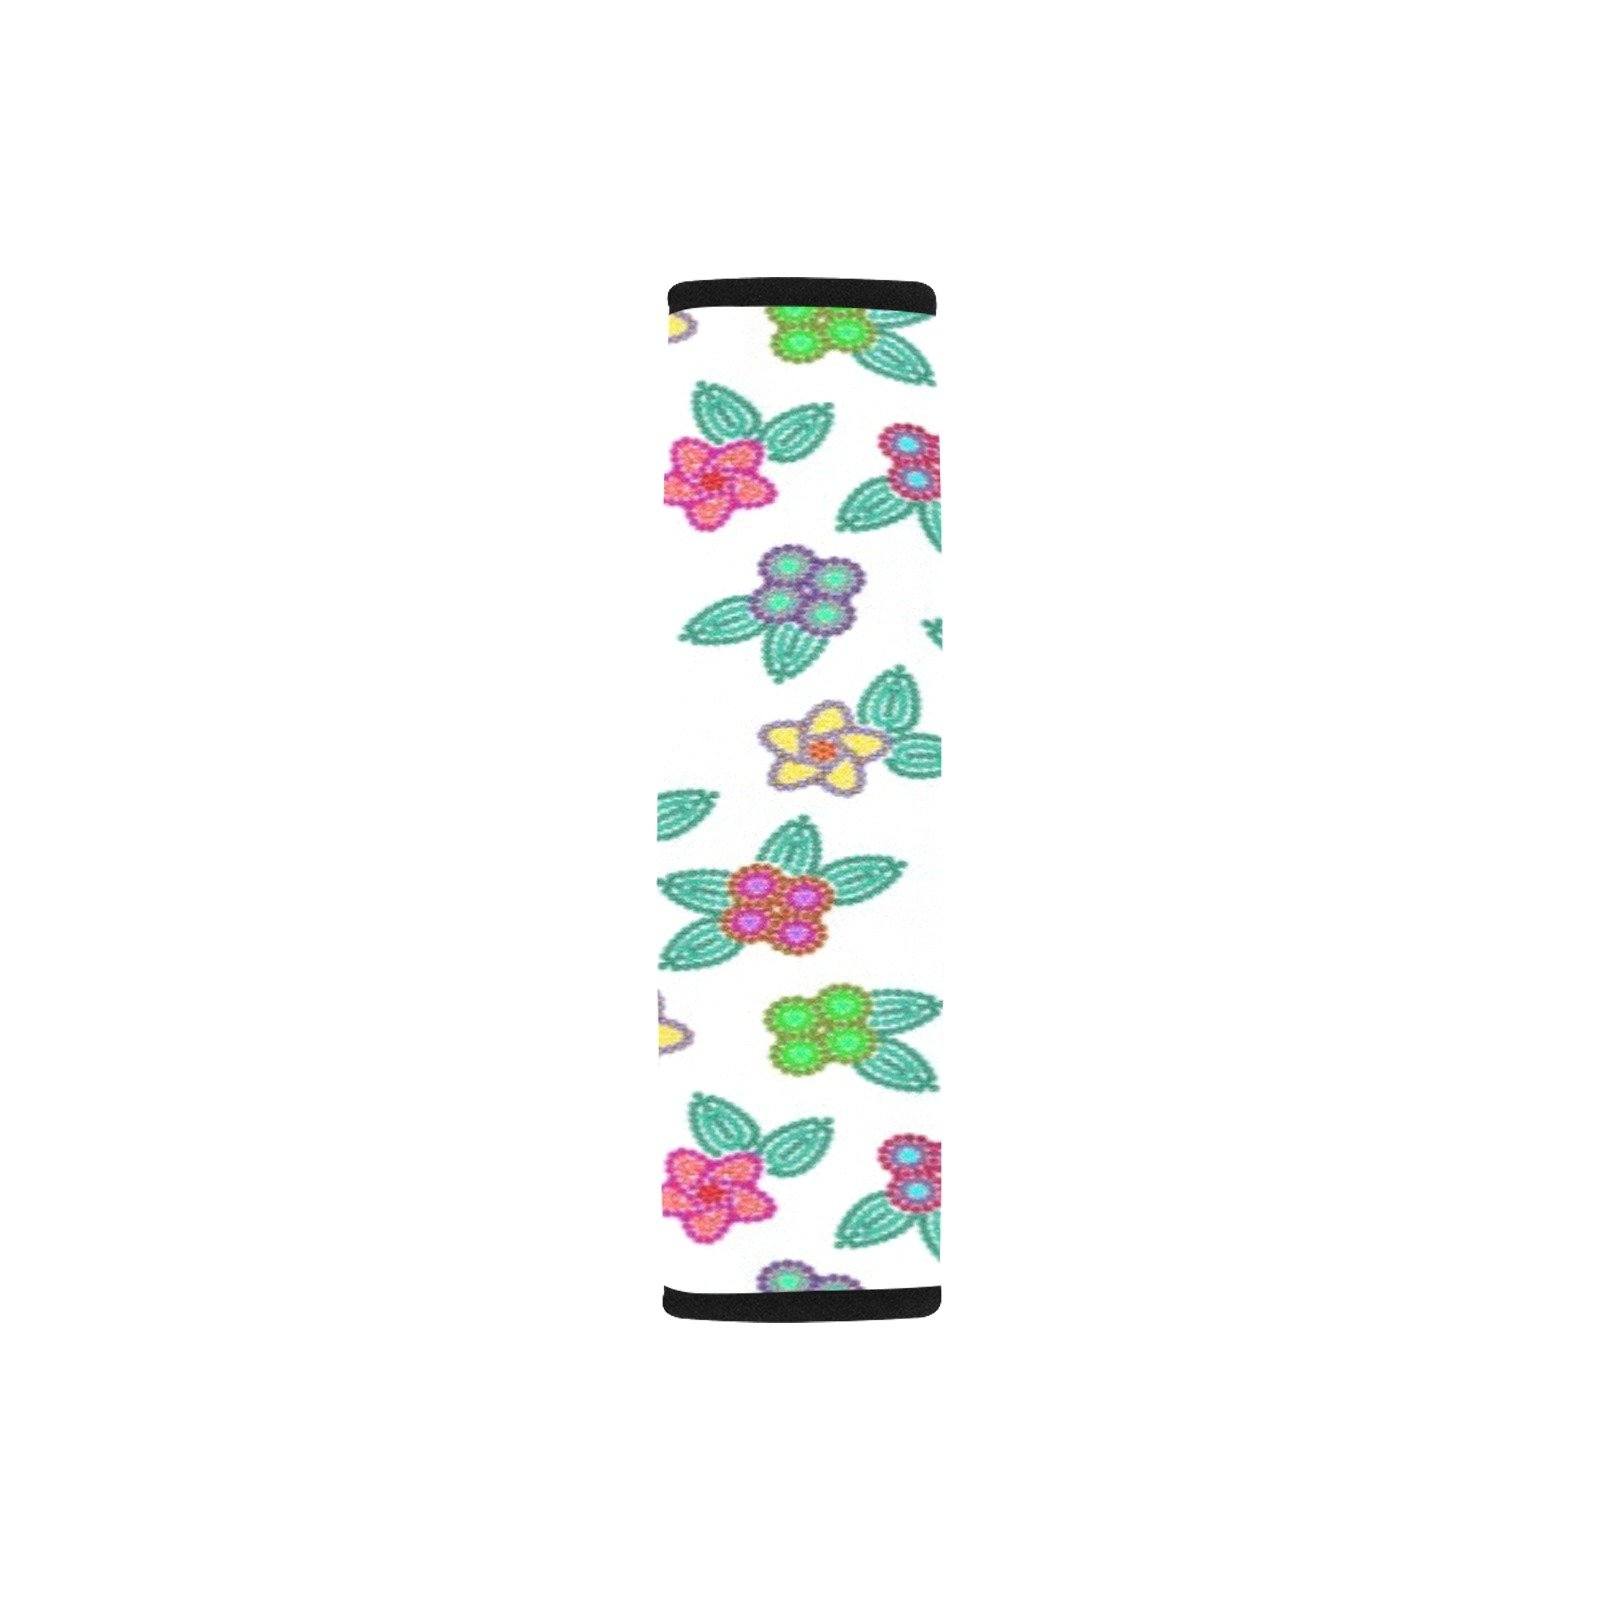 Berry Flowers White Car Seat Belt Cover 7''x12.6'' (Pack of 2) Car Seat Belt Cover 7x12.6 (Pack of 2) e-joyer 